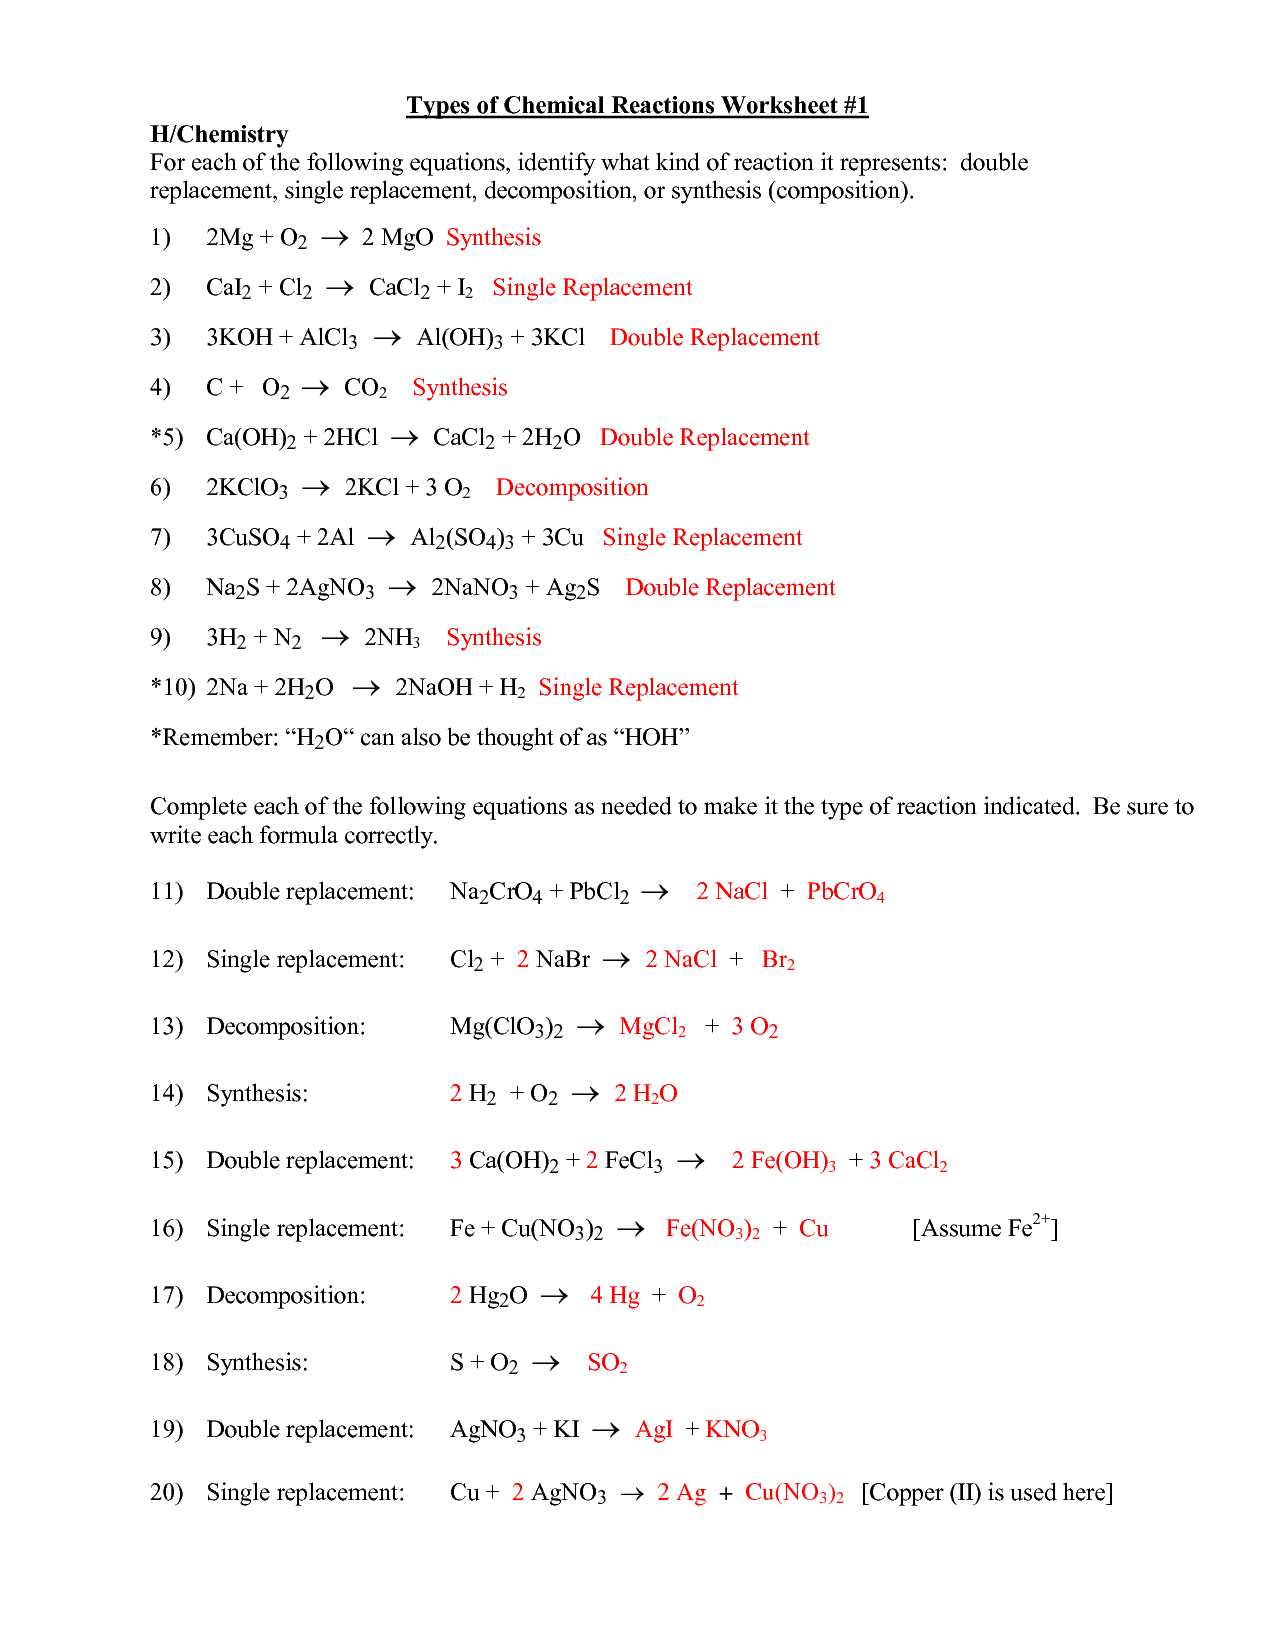 Energy Transformation Worksheet Middle School Along with Printables Types Chemical Reactions Worksheet Answers Of Chemical